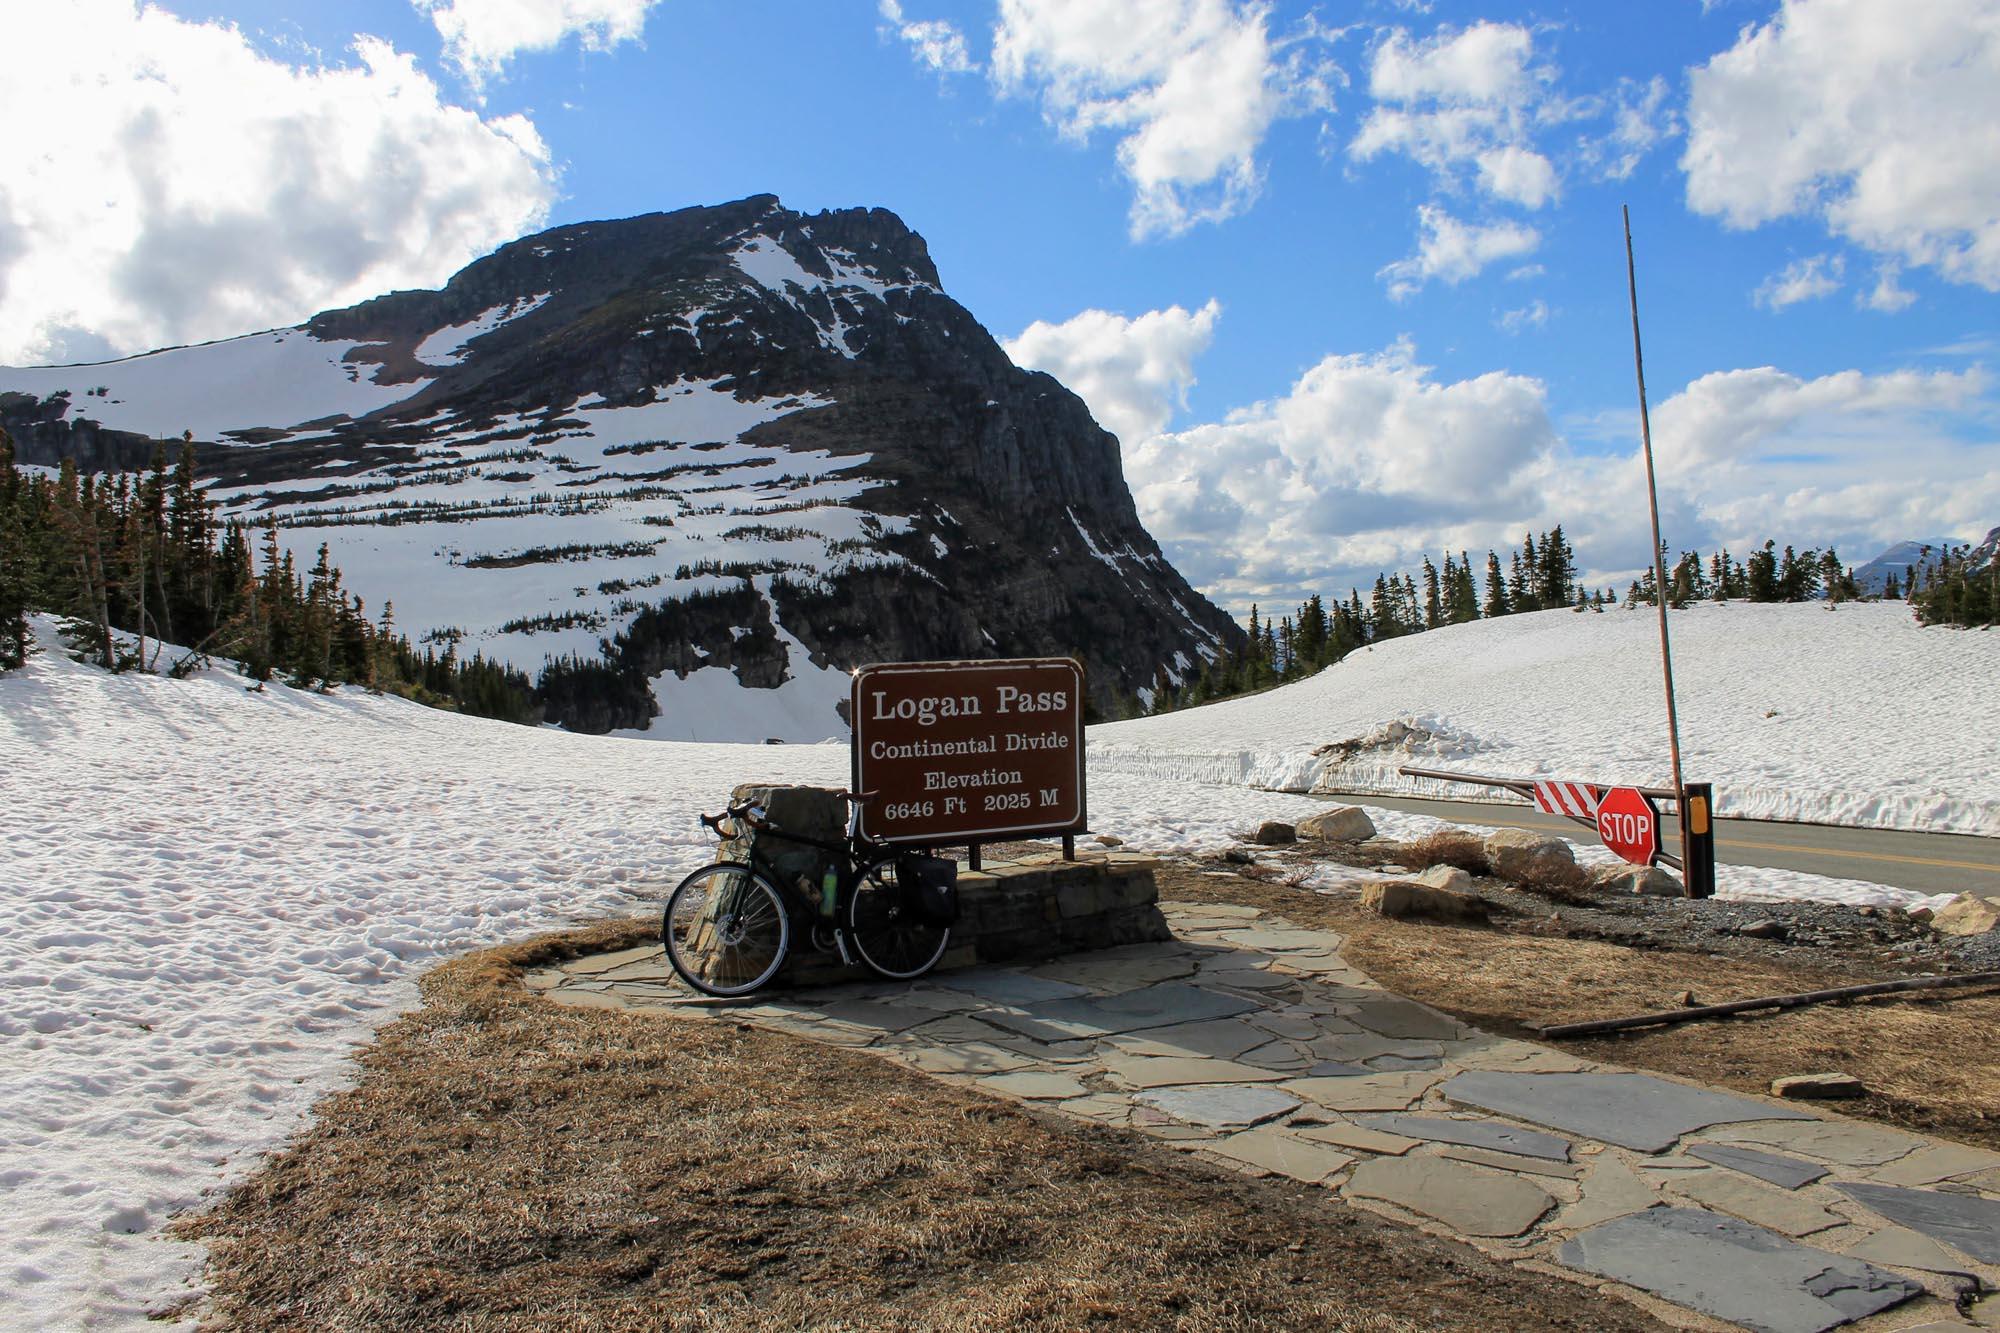 After approximately 16 miles and 3,200 vertical feet, Logan Pass awaits